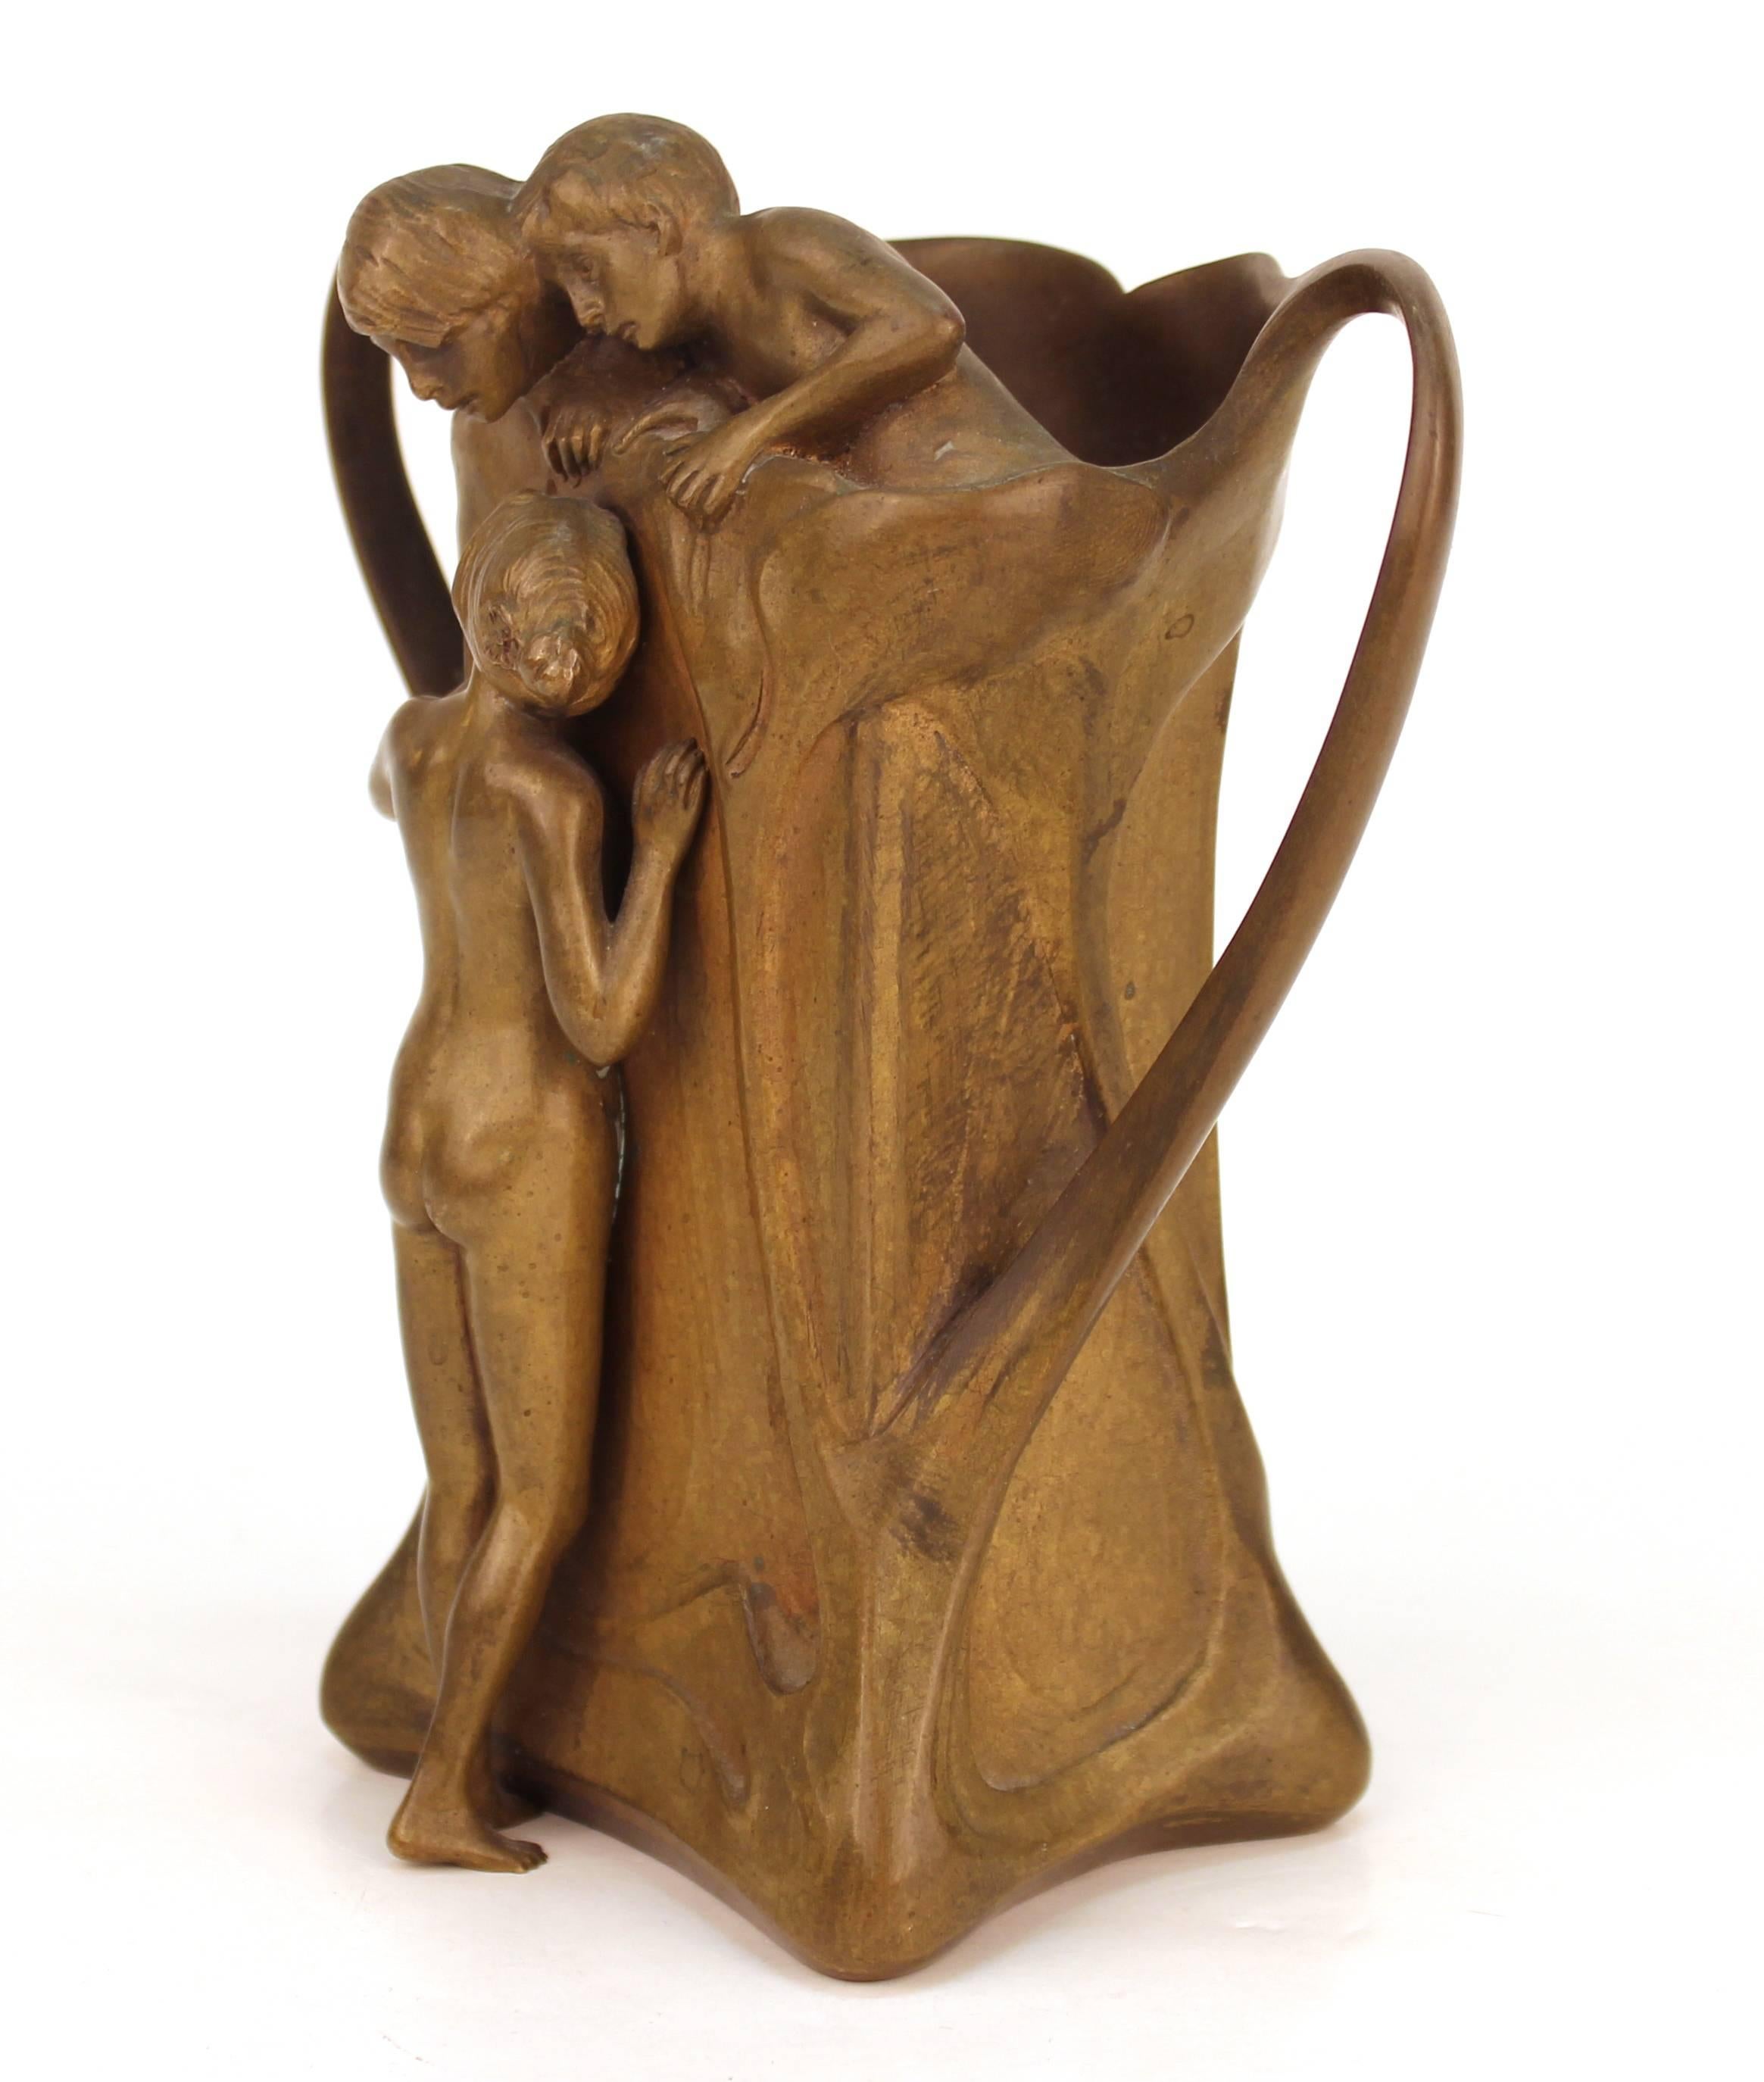 An Austrian Jugendstil - Art Nouveau bronze sculpted vase signed 'H. Babka'. The piece has sculpted nudes and sinuous lines. Fully marked on reverse of base on lower right 